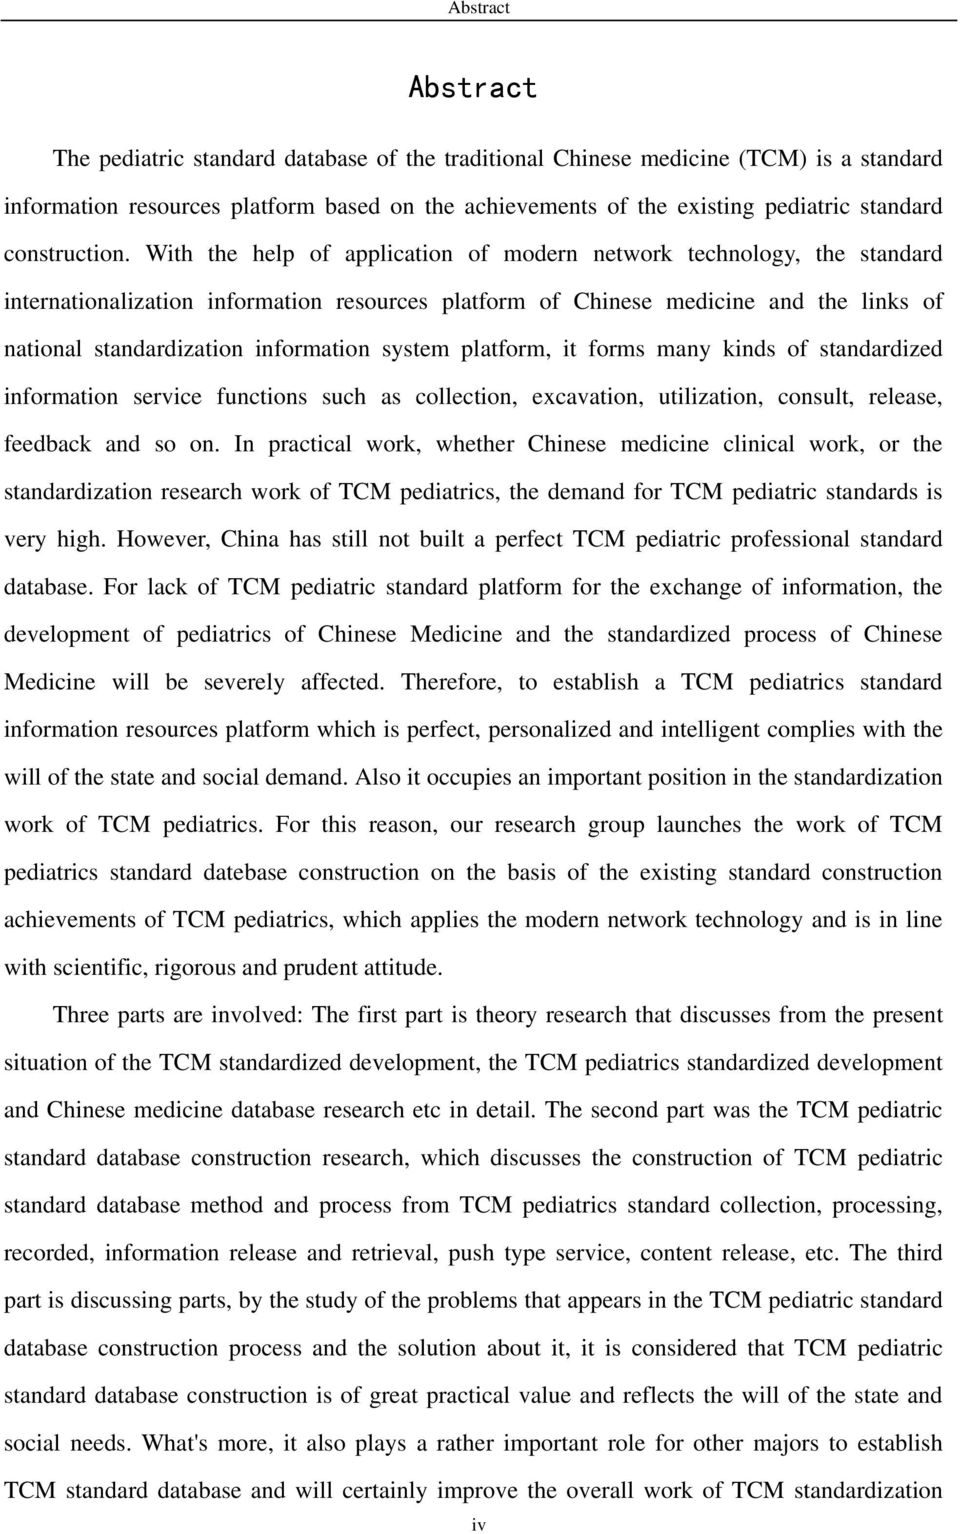 With the help of application of modern network technology, the standard internationalization information resources platform of Chinese medicine and the links of national standardization information